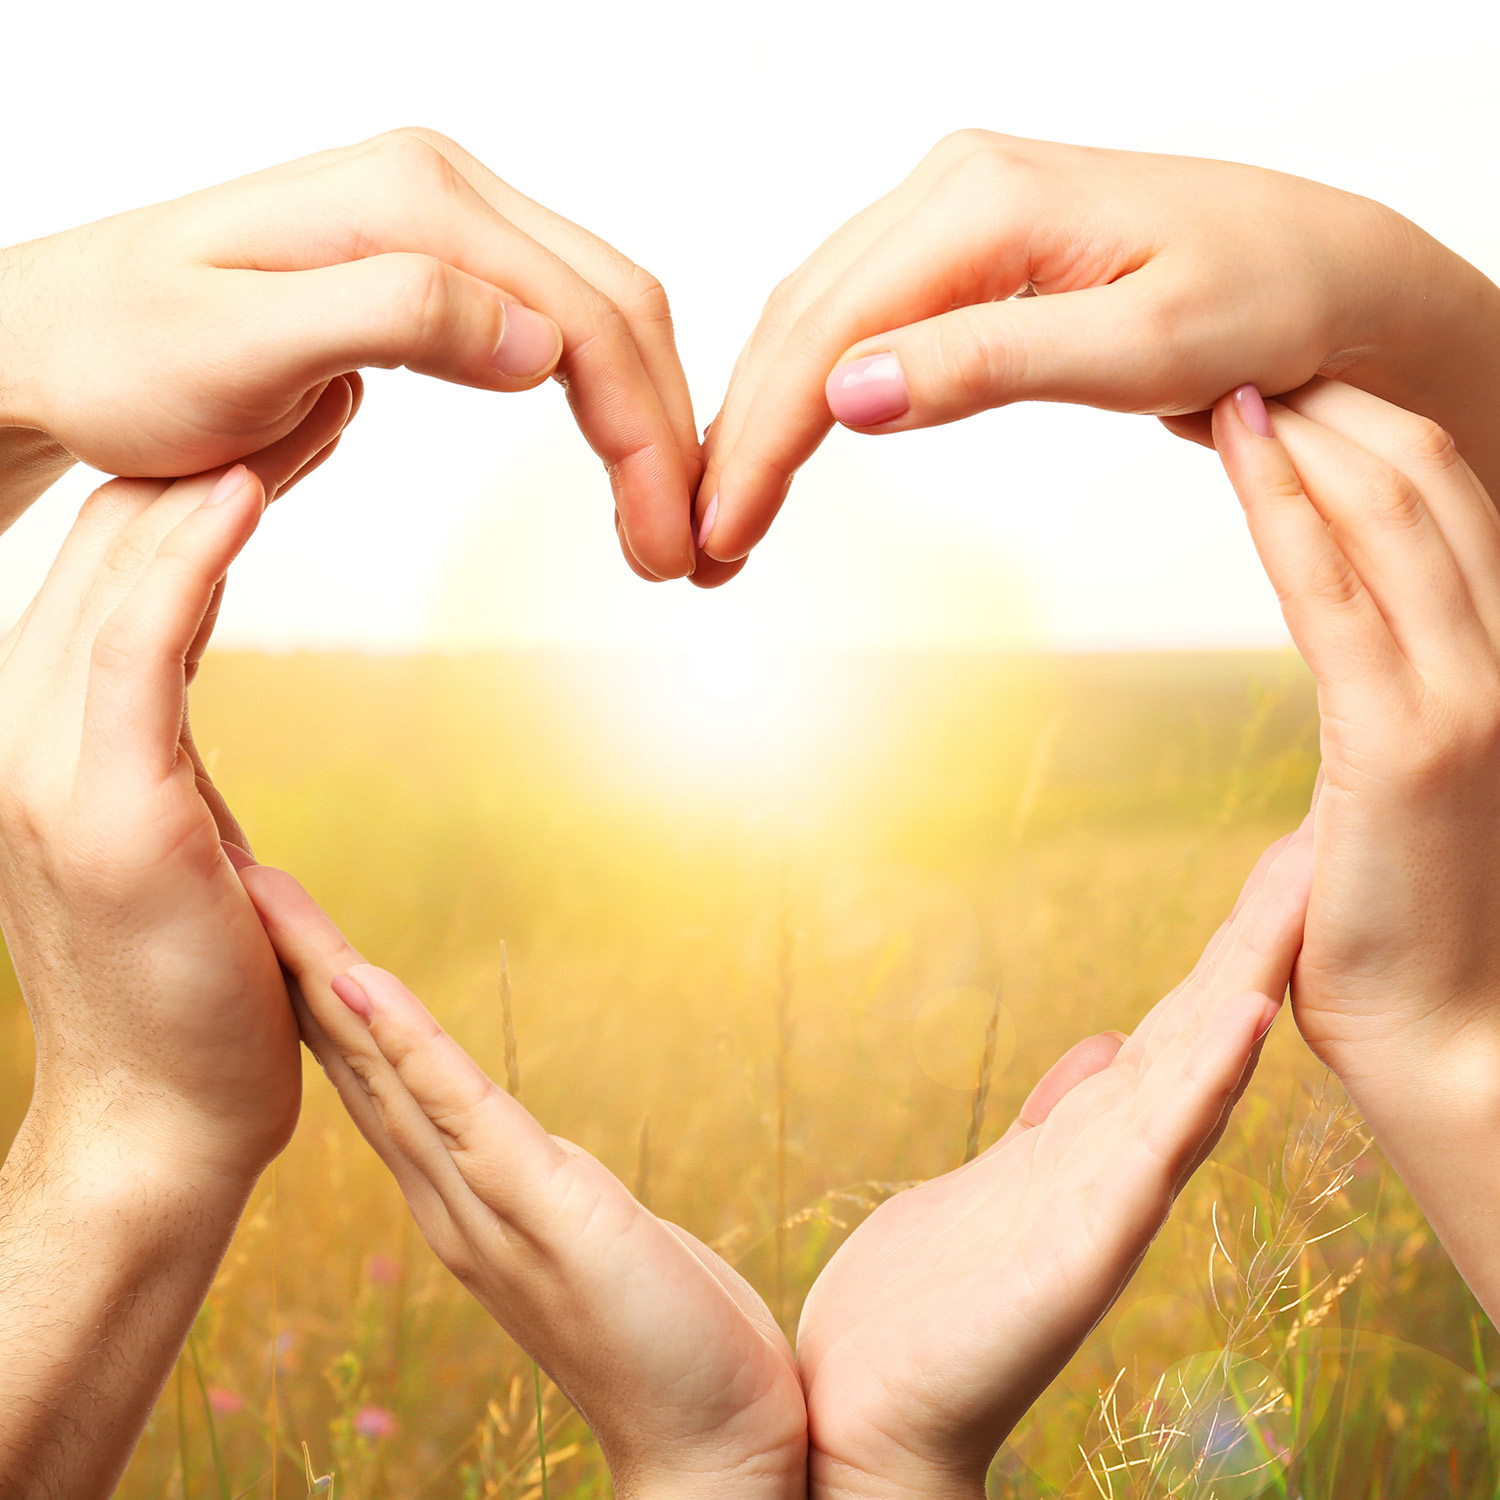 Heart shaped by hands on nature background